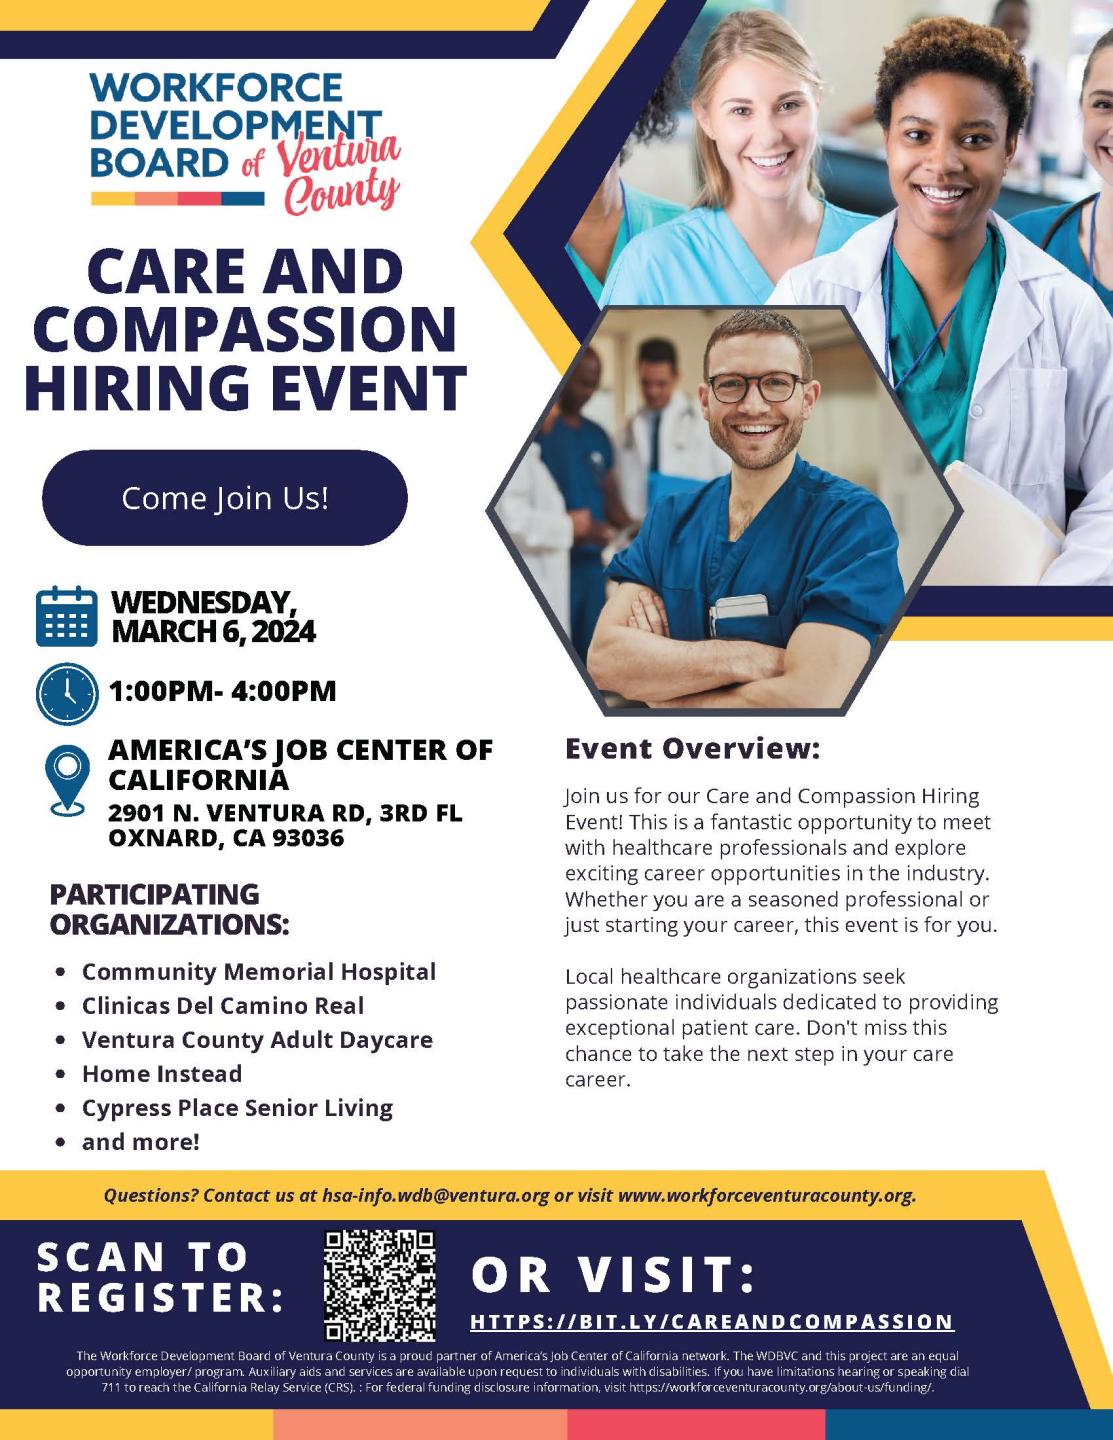 Join us March 6th, 2024 for a care and compassion hiring event with the workforce development board of Ventura county.